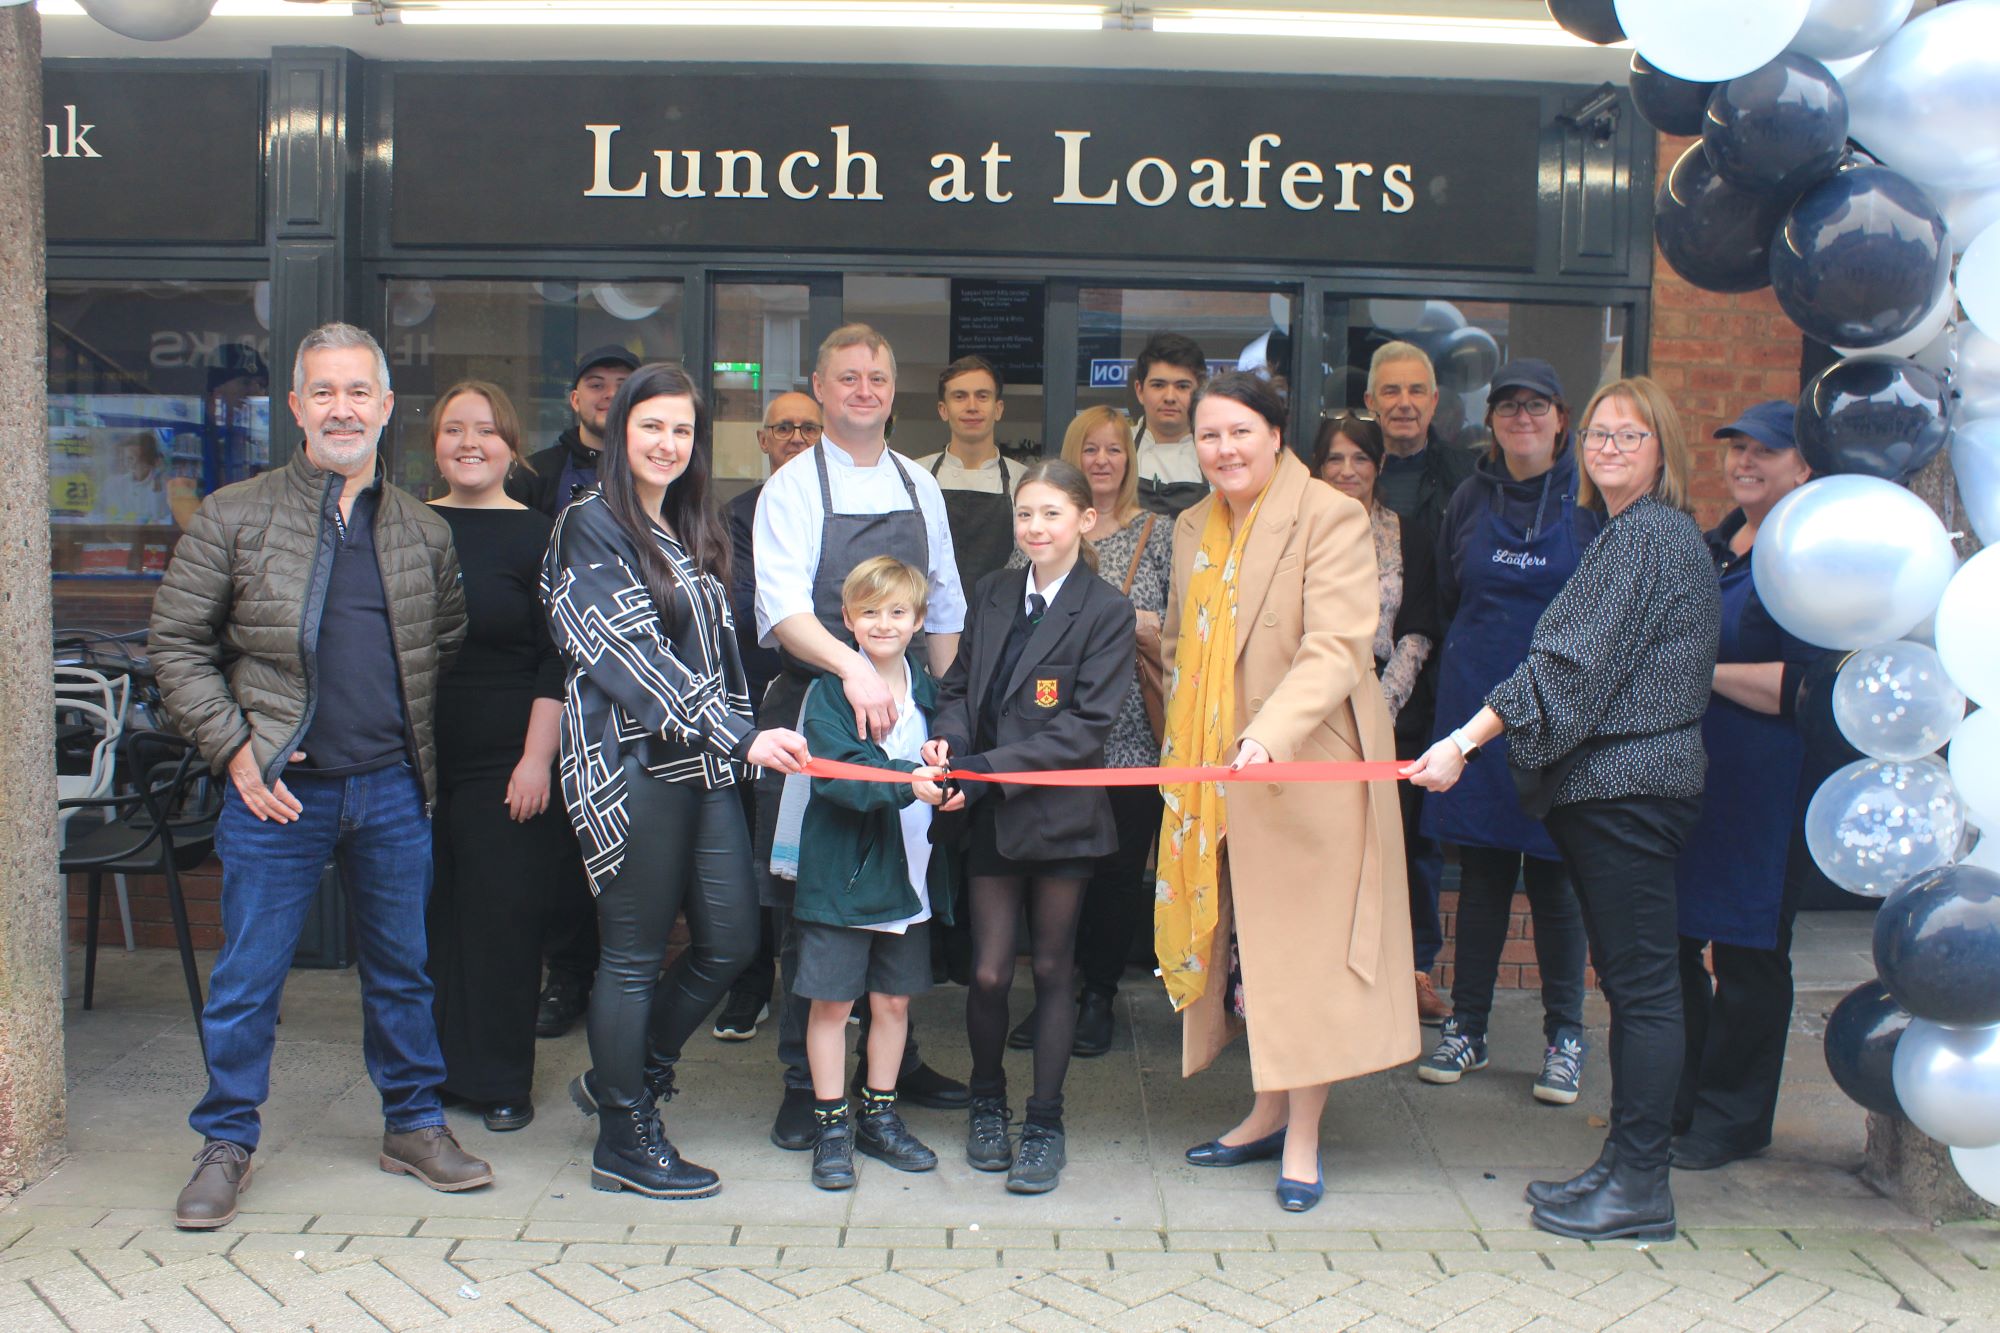 A photo of the Lunch at Loafers team cutting the ribbon at the business's new premises today.